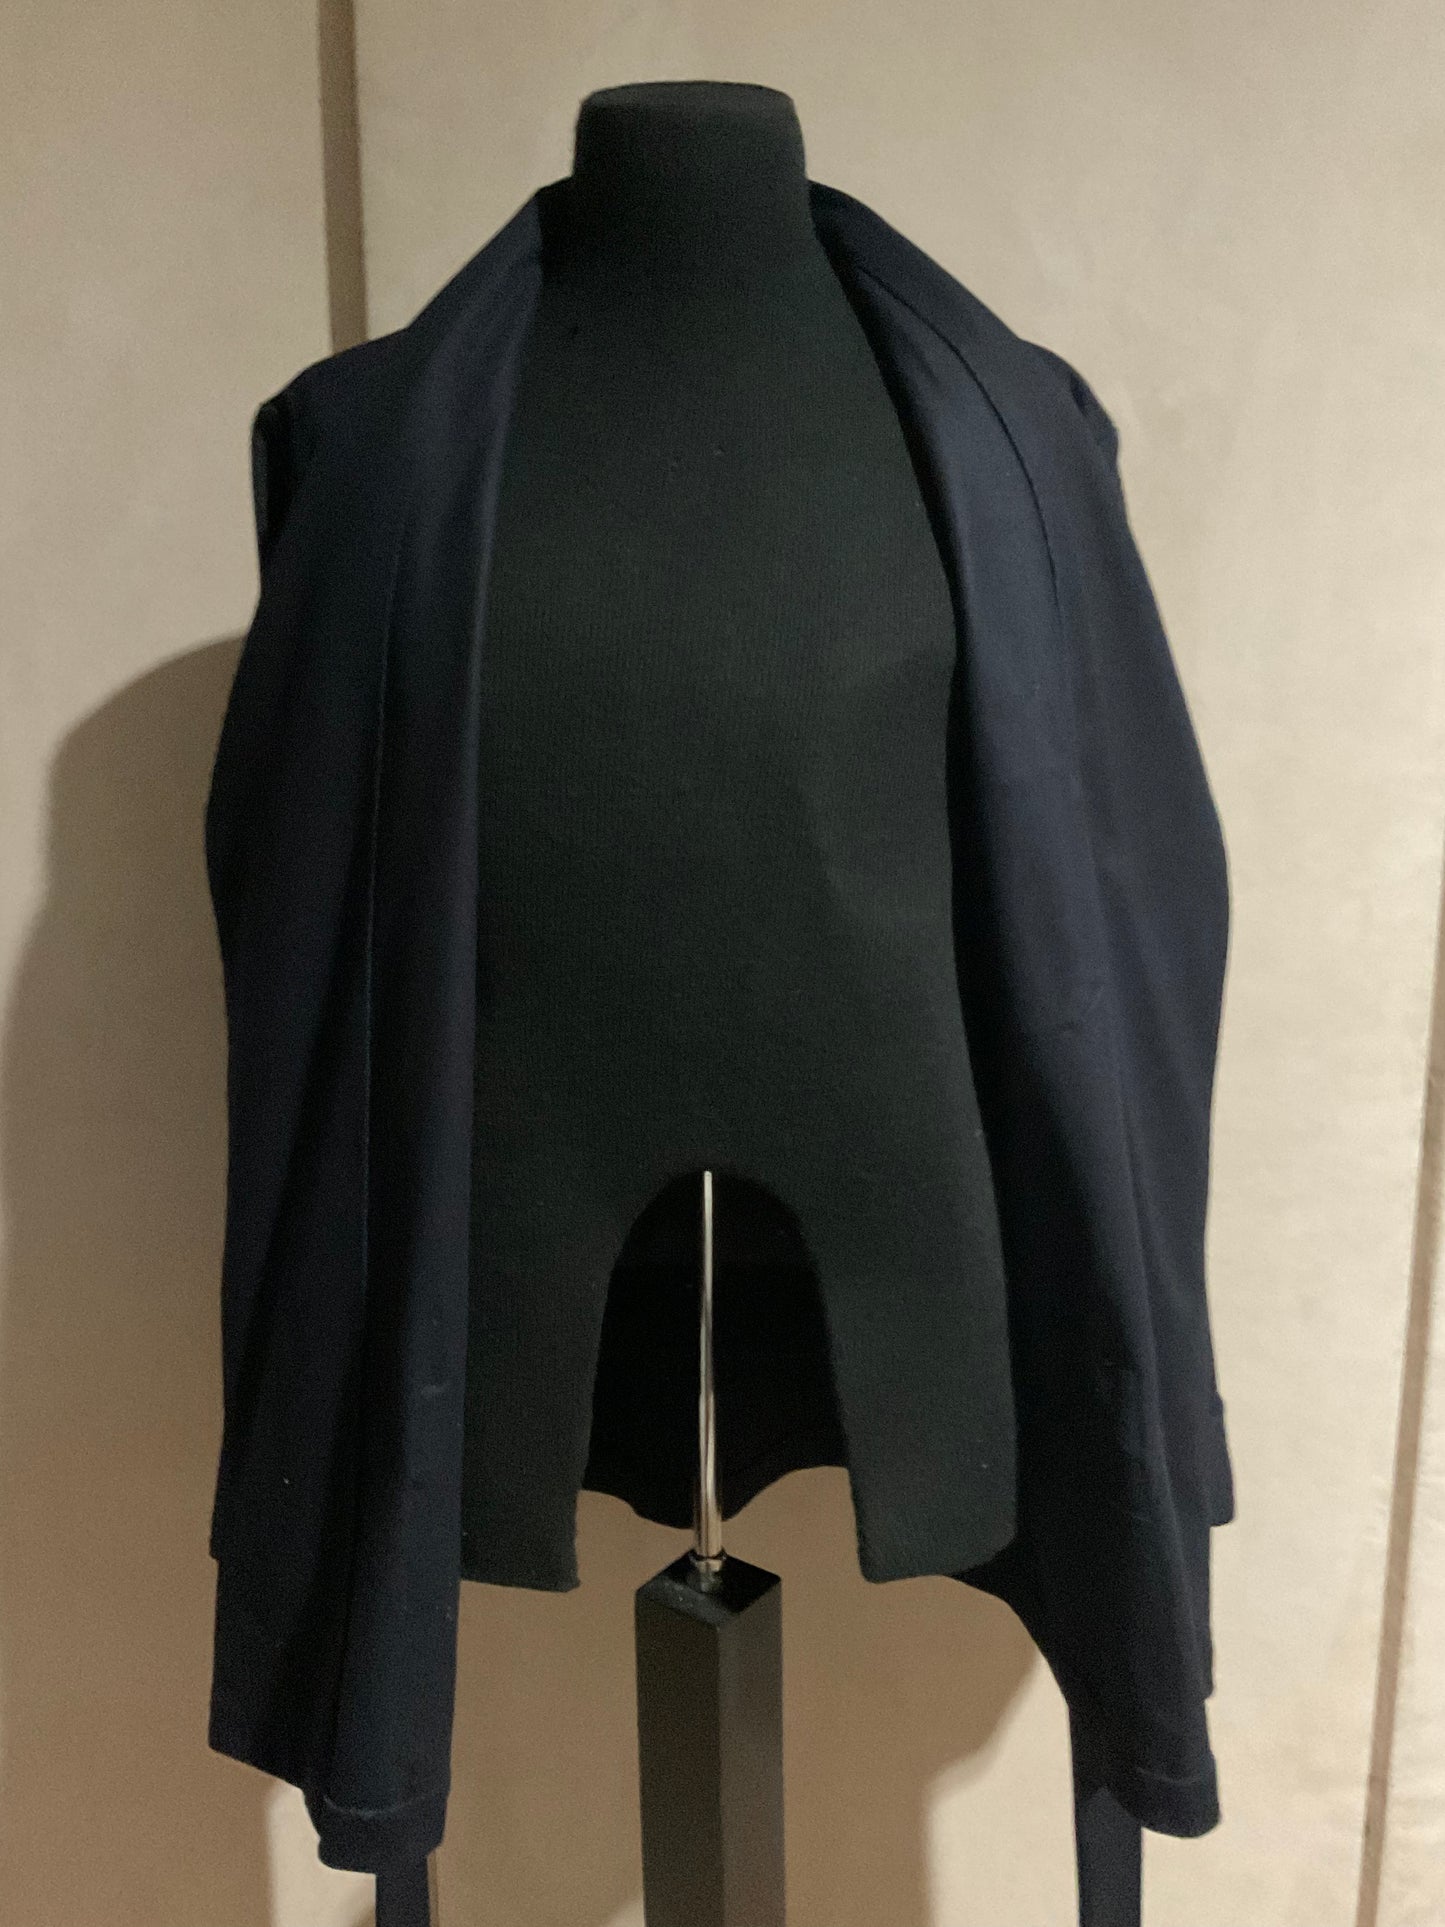 R P SMOKING JACKET / NAVY CASHMERE & WOOL / MADE IN ITALY / NEW / LARGE - EXTRA LARGE